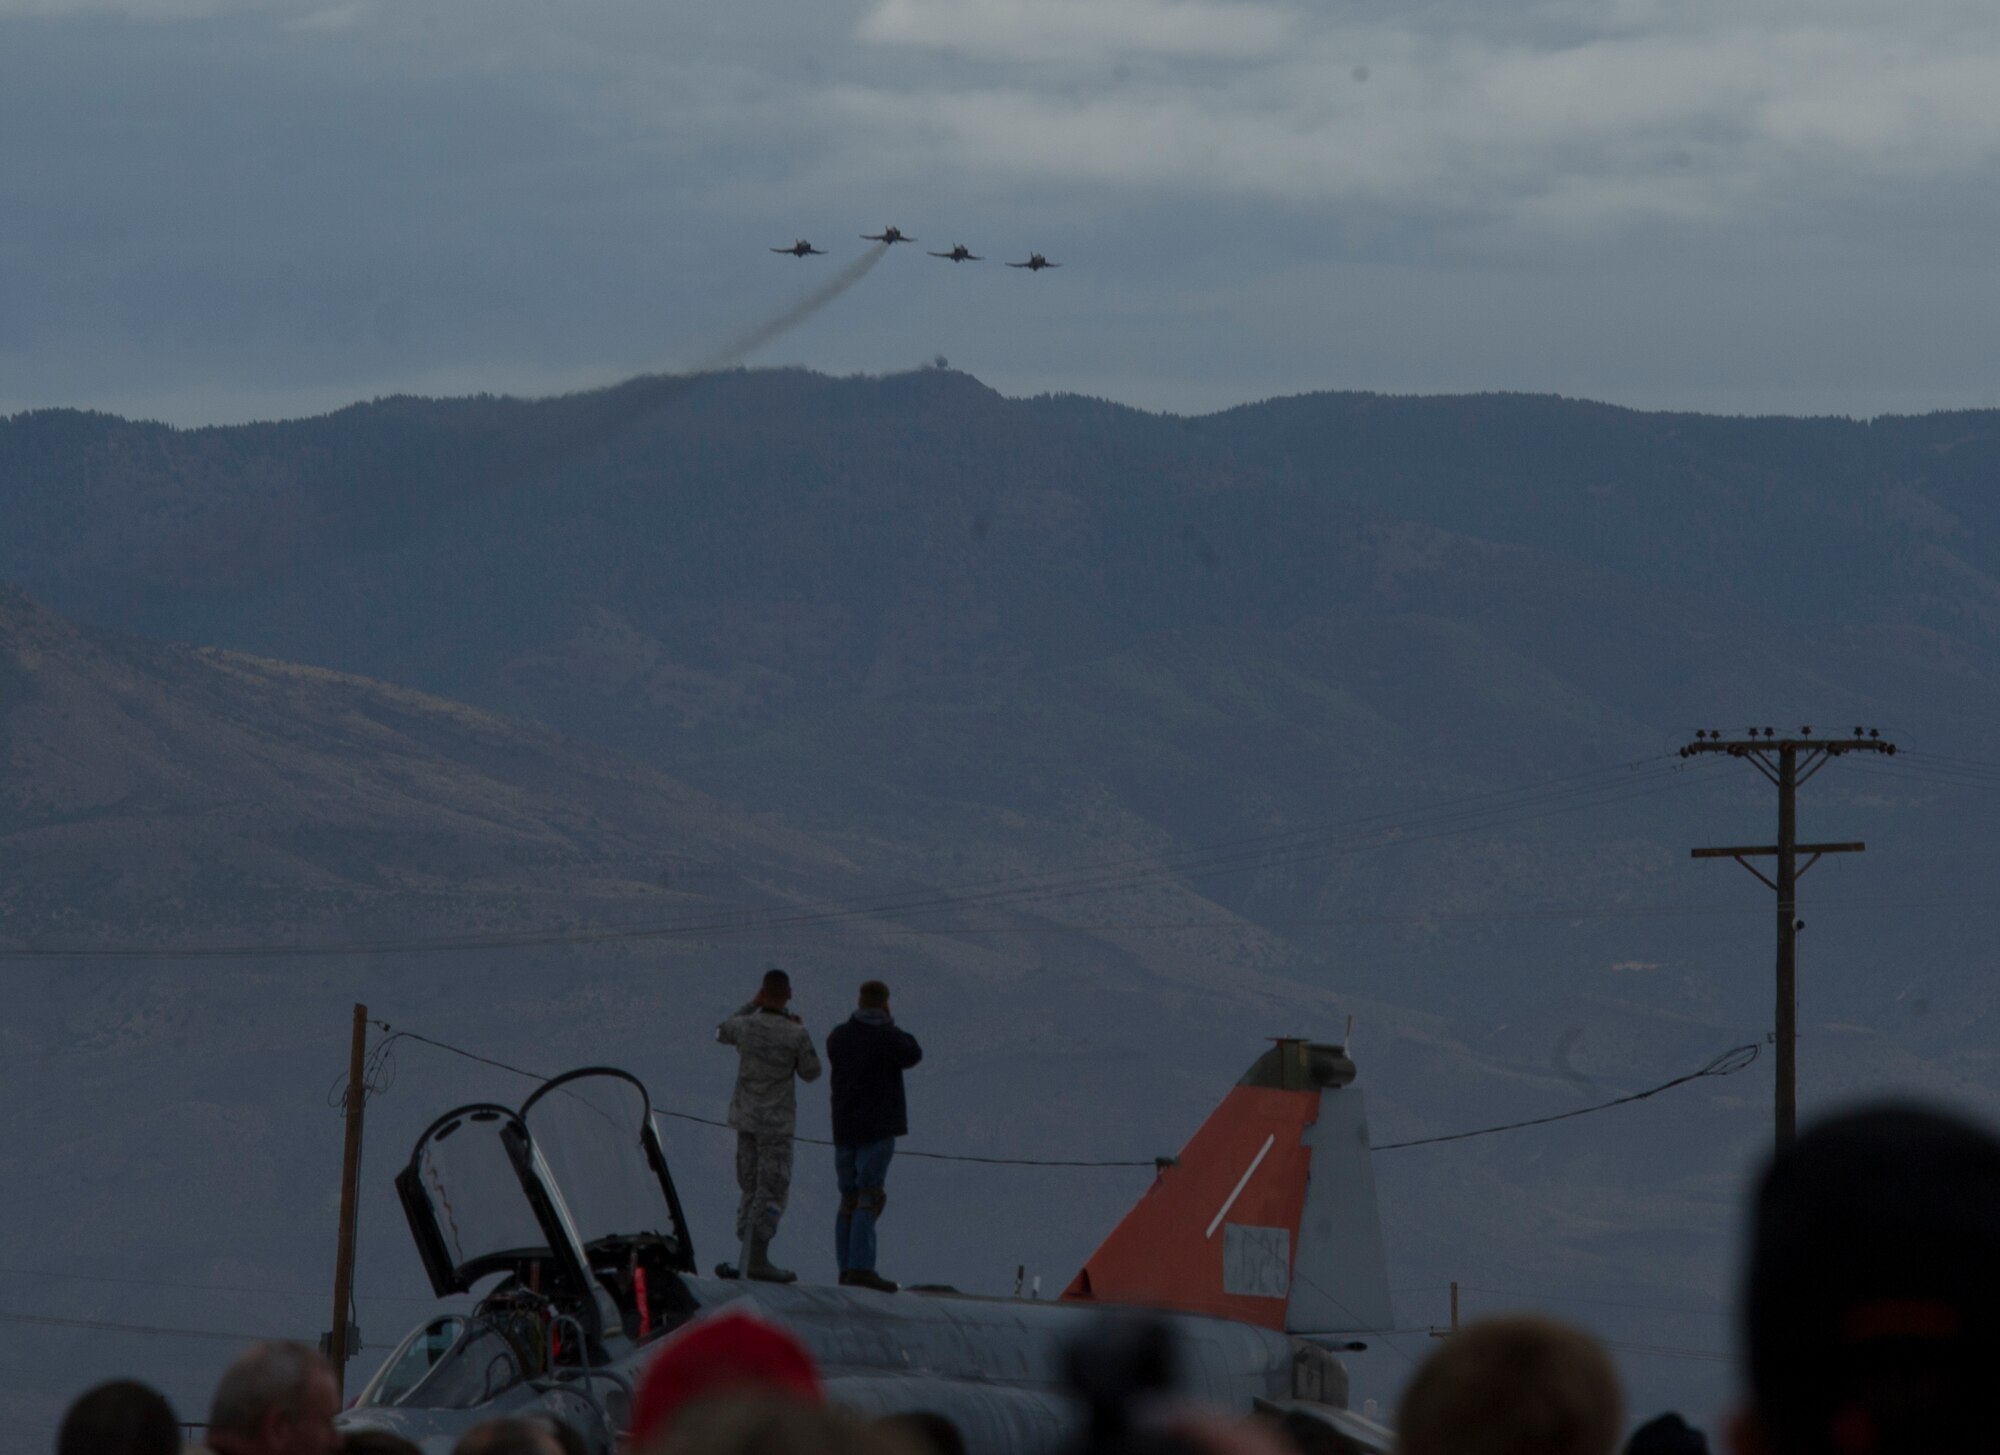 Hundreds of people watch a formation of QF-4 Phantoms during the QF-4 Phinal Phlight event Dec. 21, 2016 at Holloman Air Force Base, N.M. The event included an air demonstration, formal retirement ceremony and a "pet-the-jet" expo with static displays of the QF-4 Phantom, QF-16 Fighting Falcon and E-9 “Widget” to mark the end of the aircraft’s 53 years of service to the Air Force. (U.S. Air Force photo by Master Sgt. Matthew McGovern)